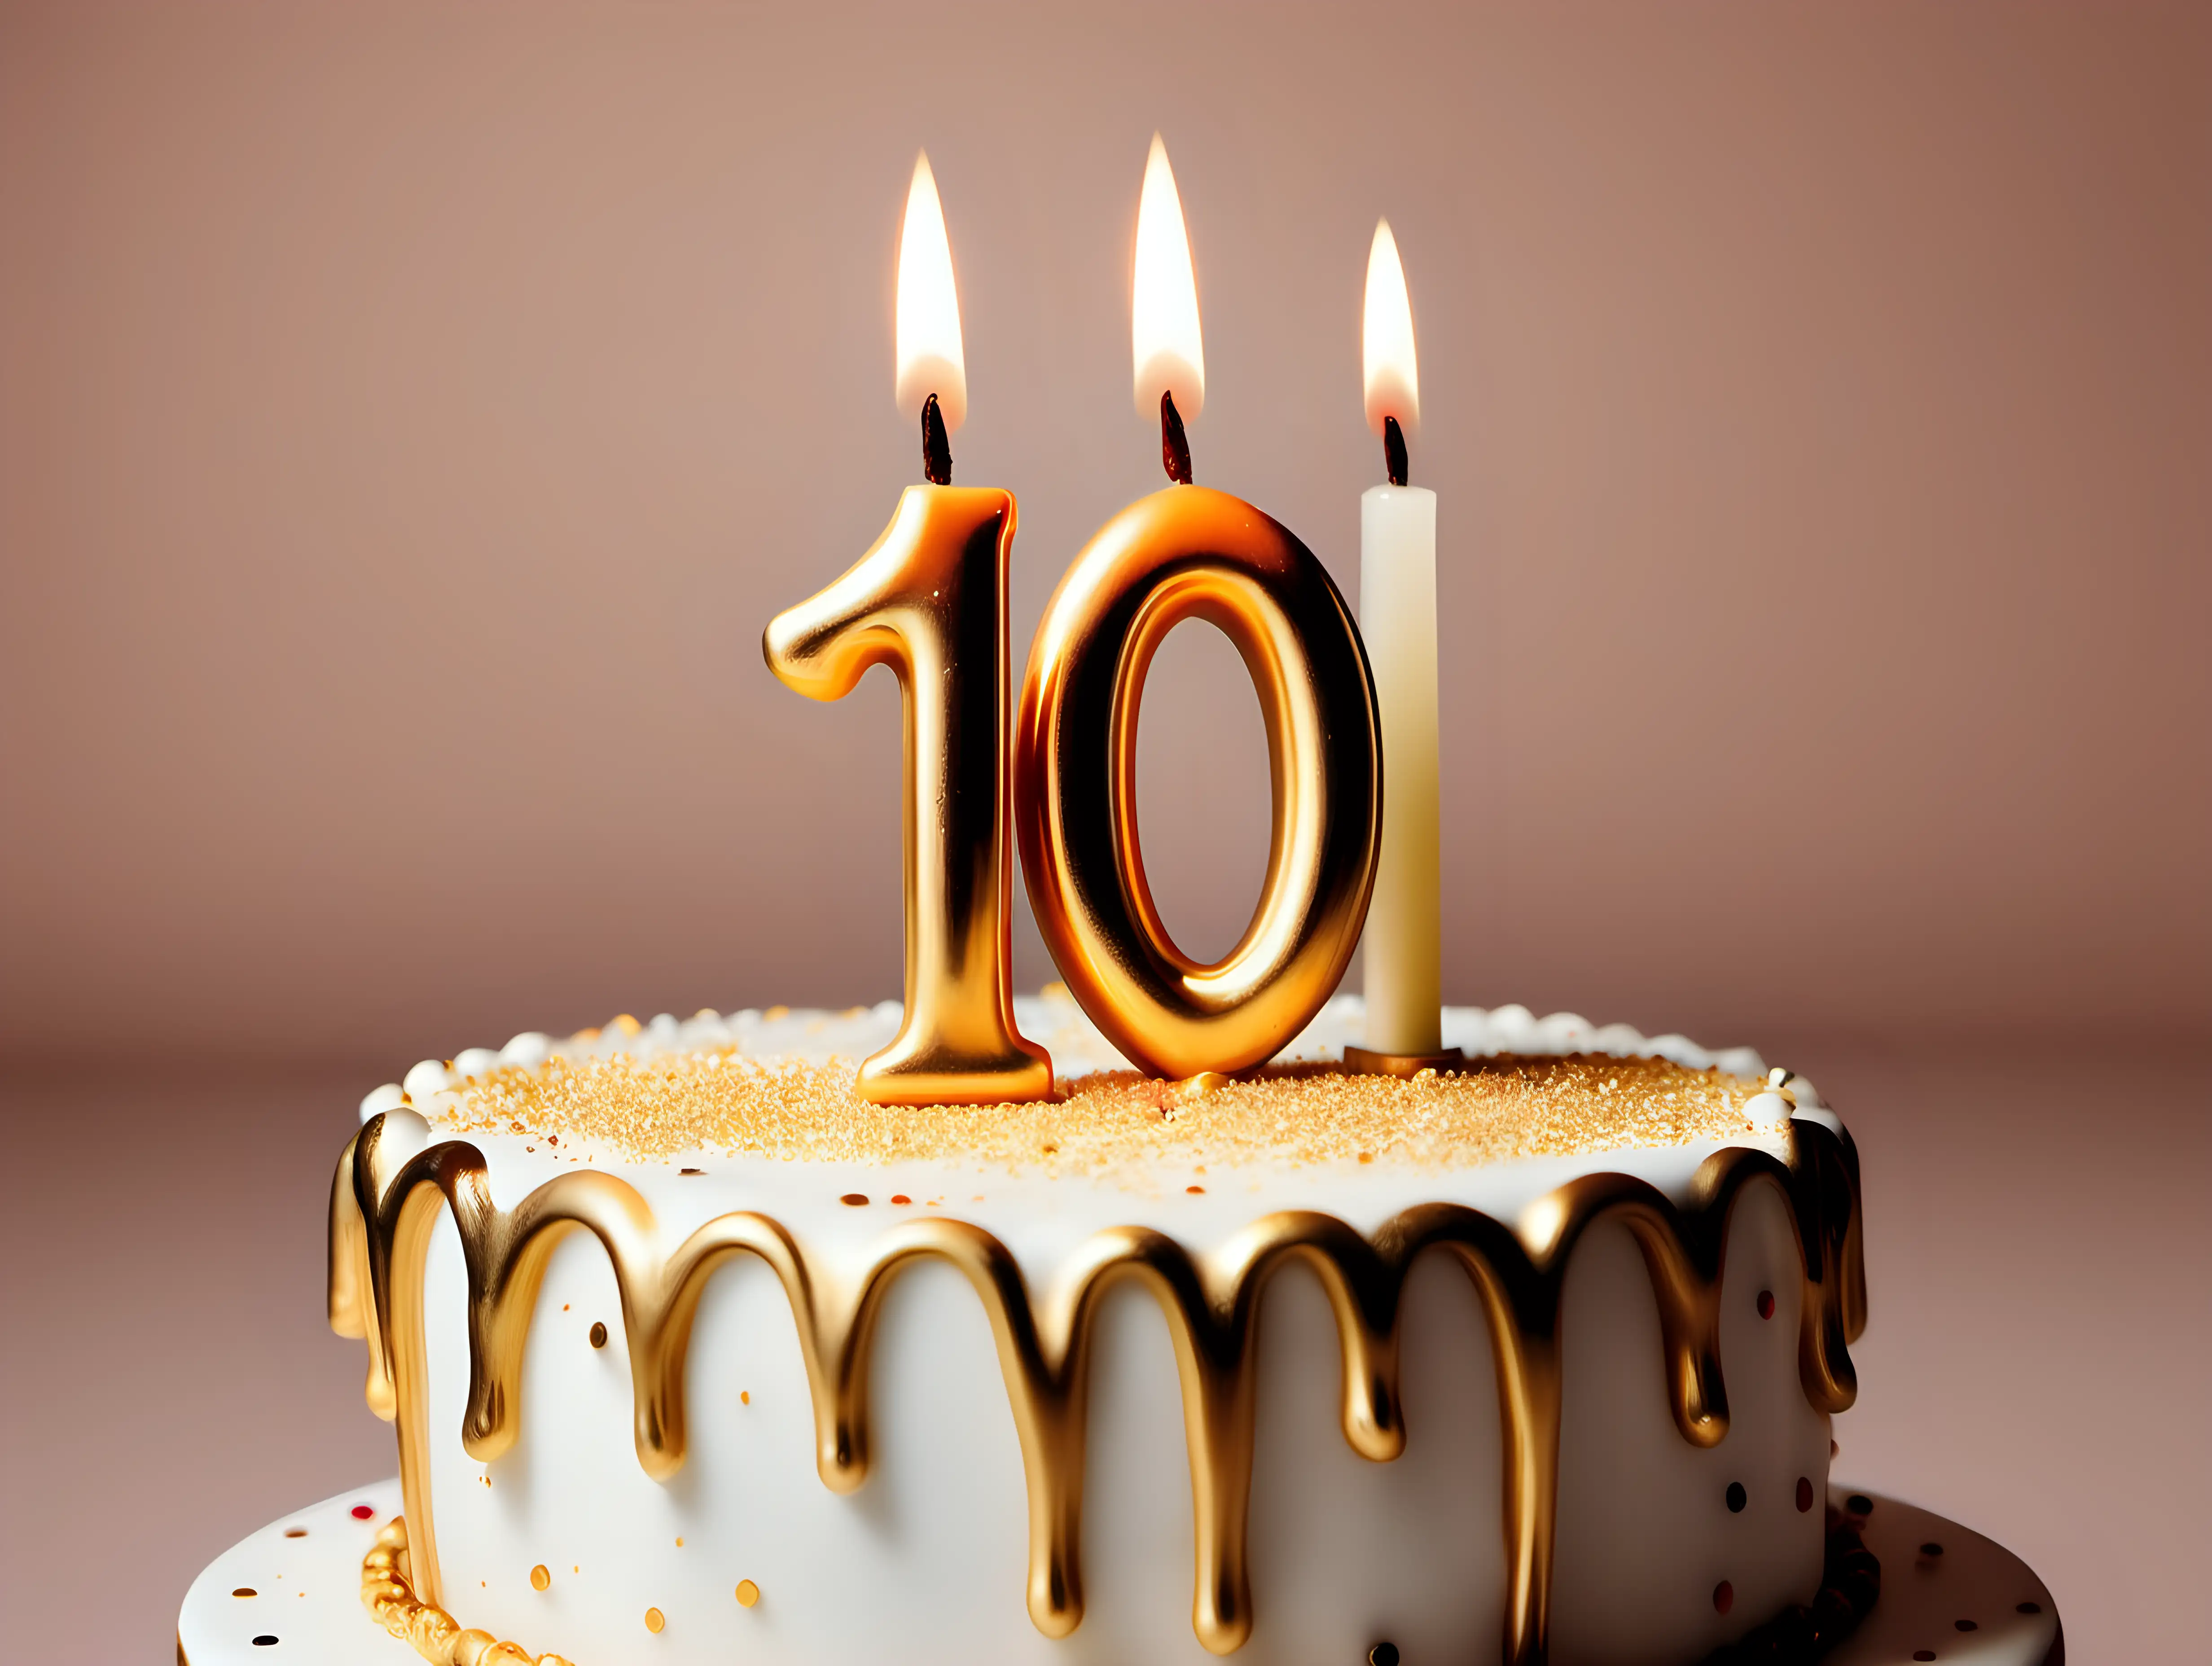 photo a gold 10th candle on a birthday cake, realistic